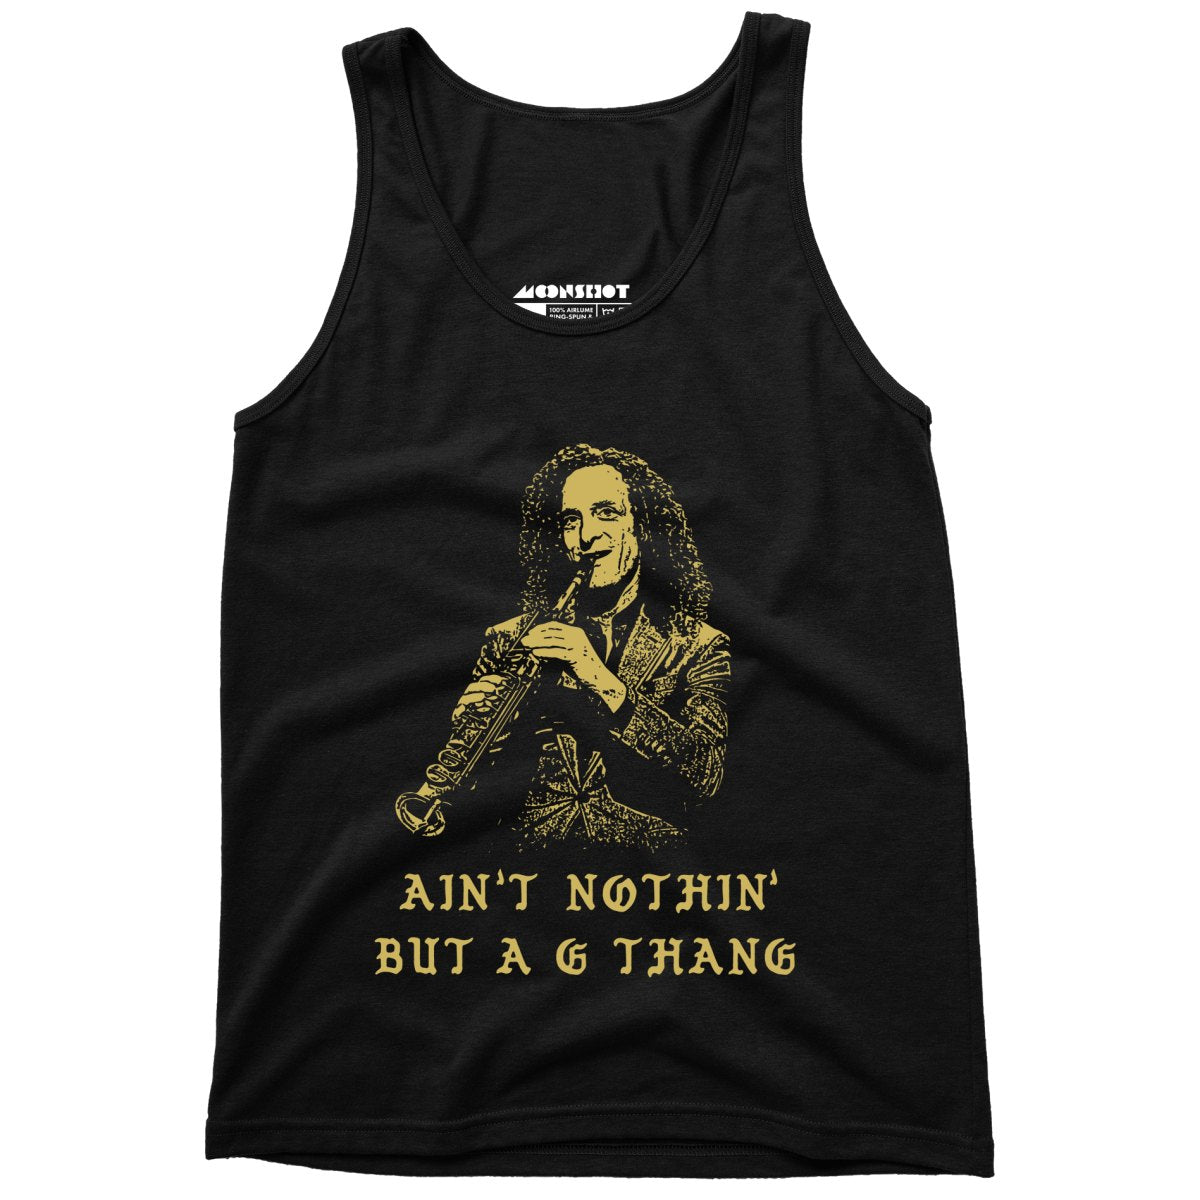 Ain't Nothin' But a G Thang - Unisex Tank Top